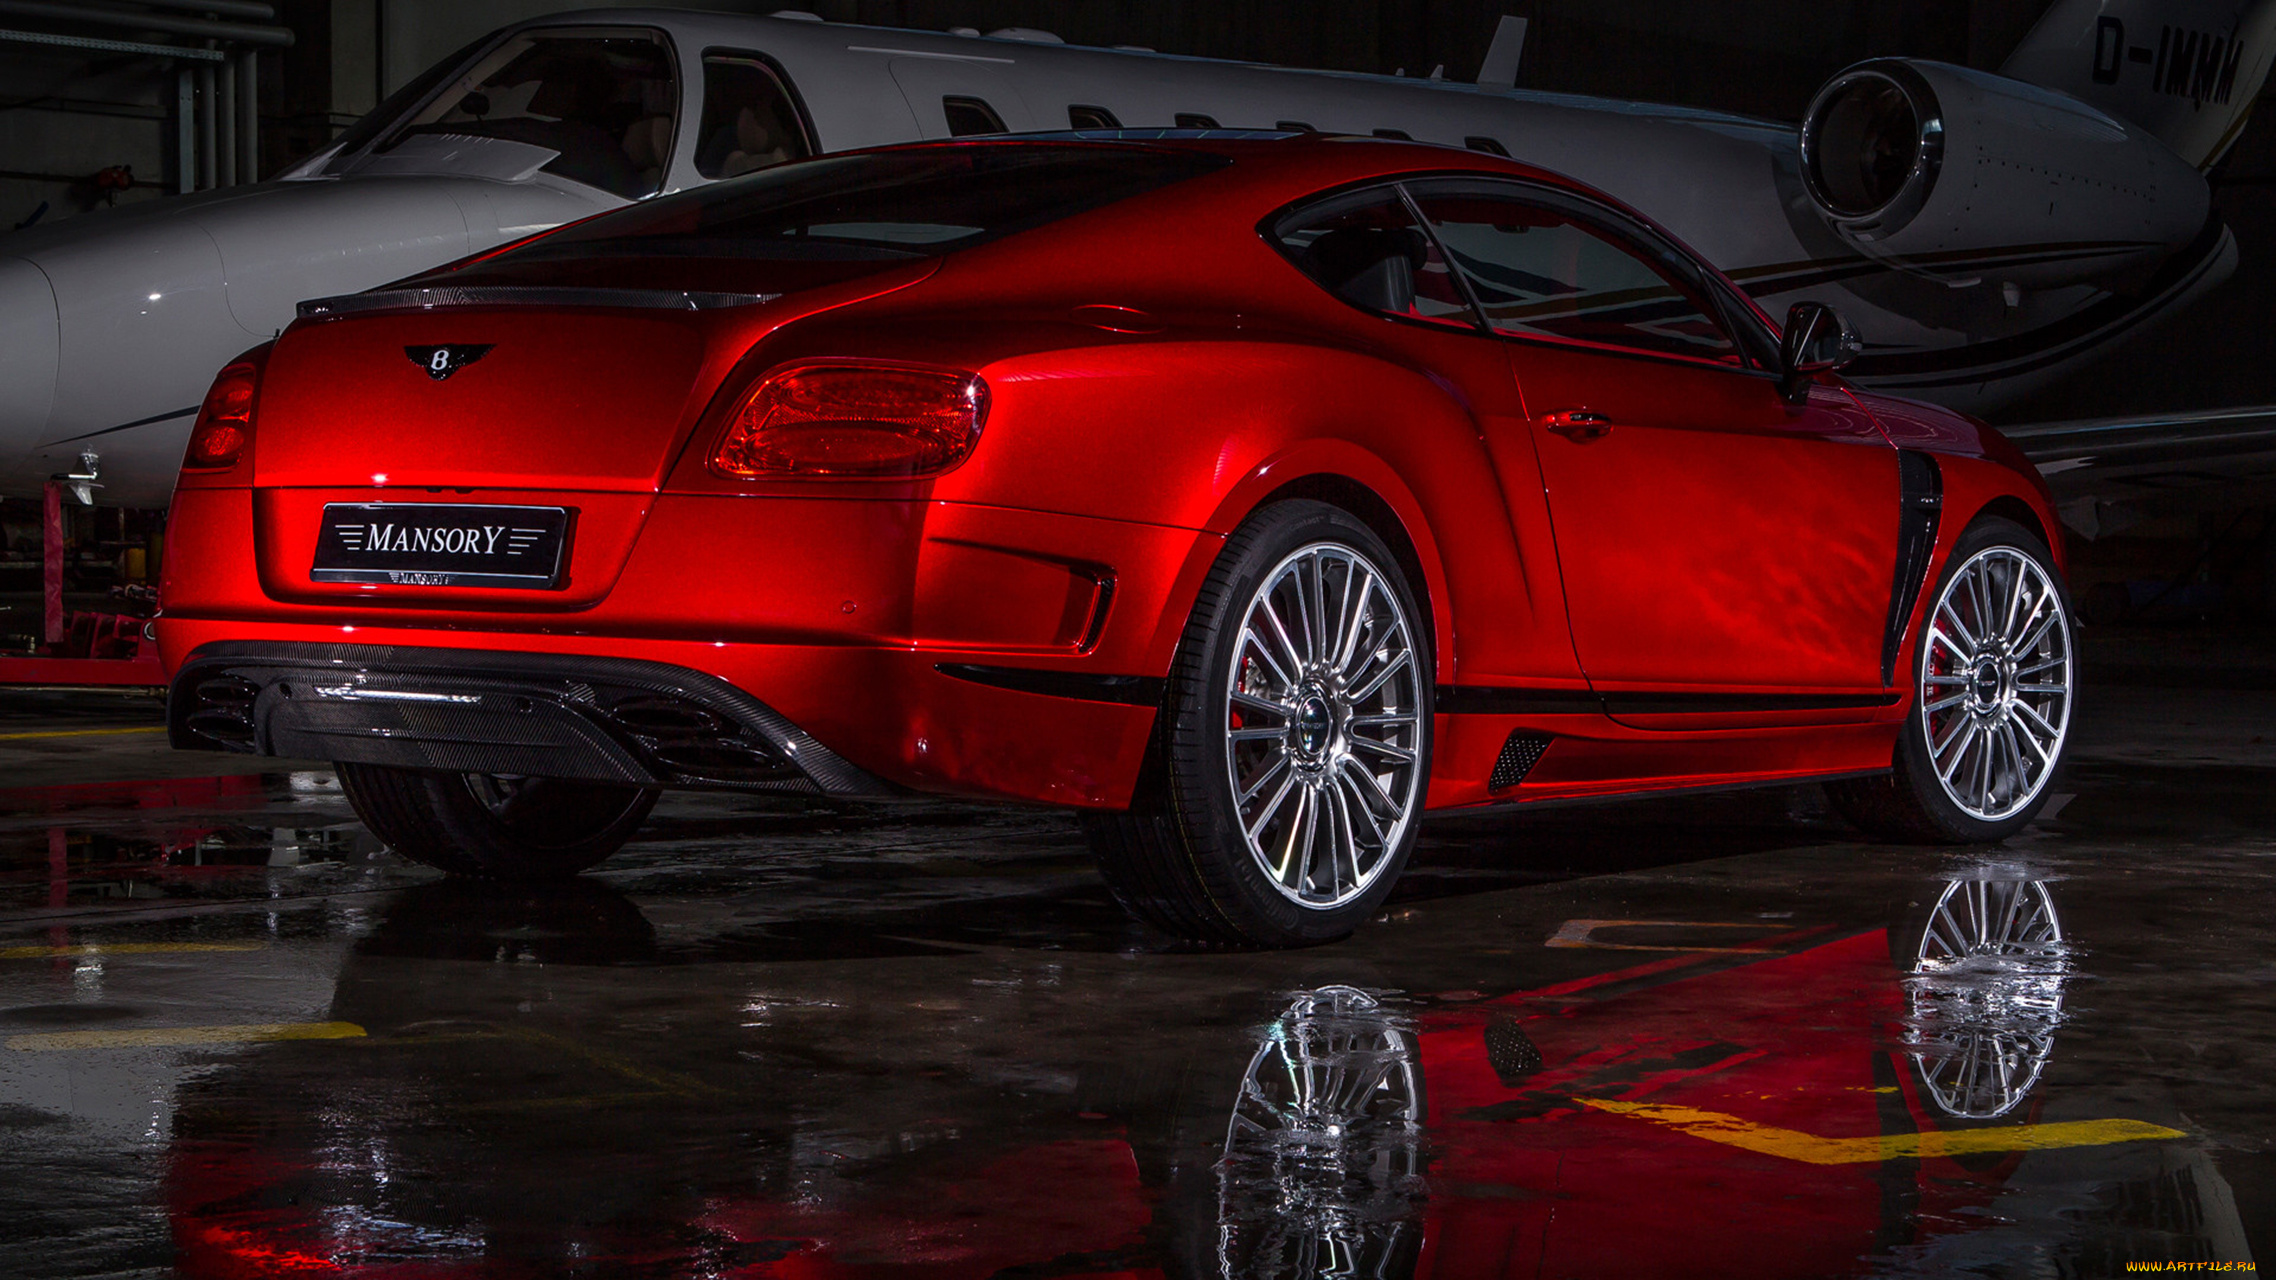 mansory, sanguis, based, on, bentley, continental, gt, 2013, автомобили, bentley, mansory, sanguis, based, continental, gt, 2013